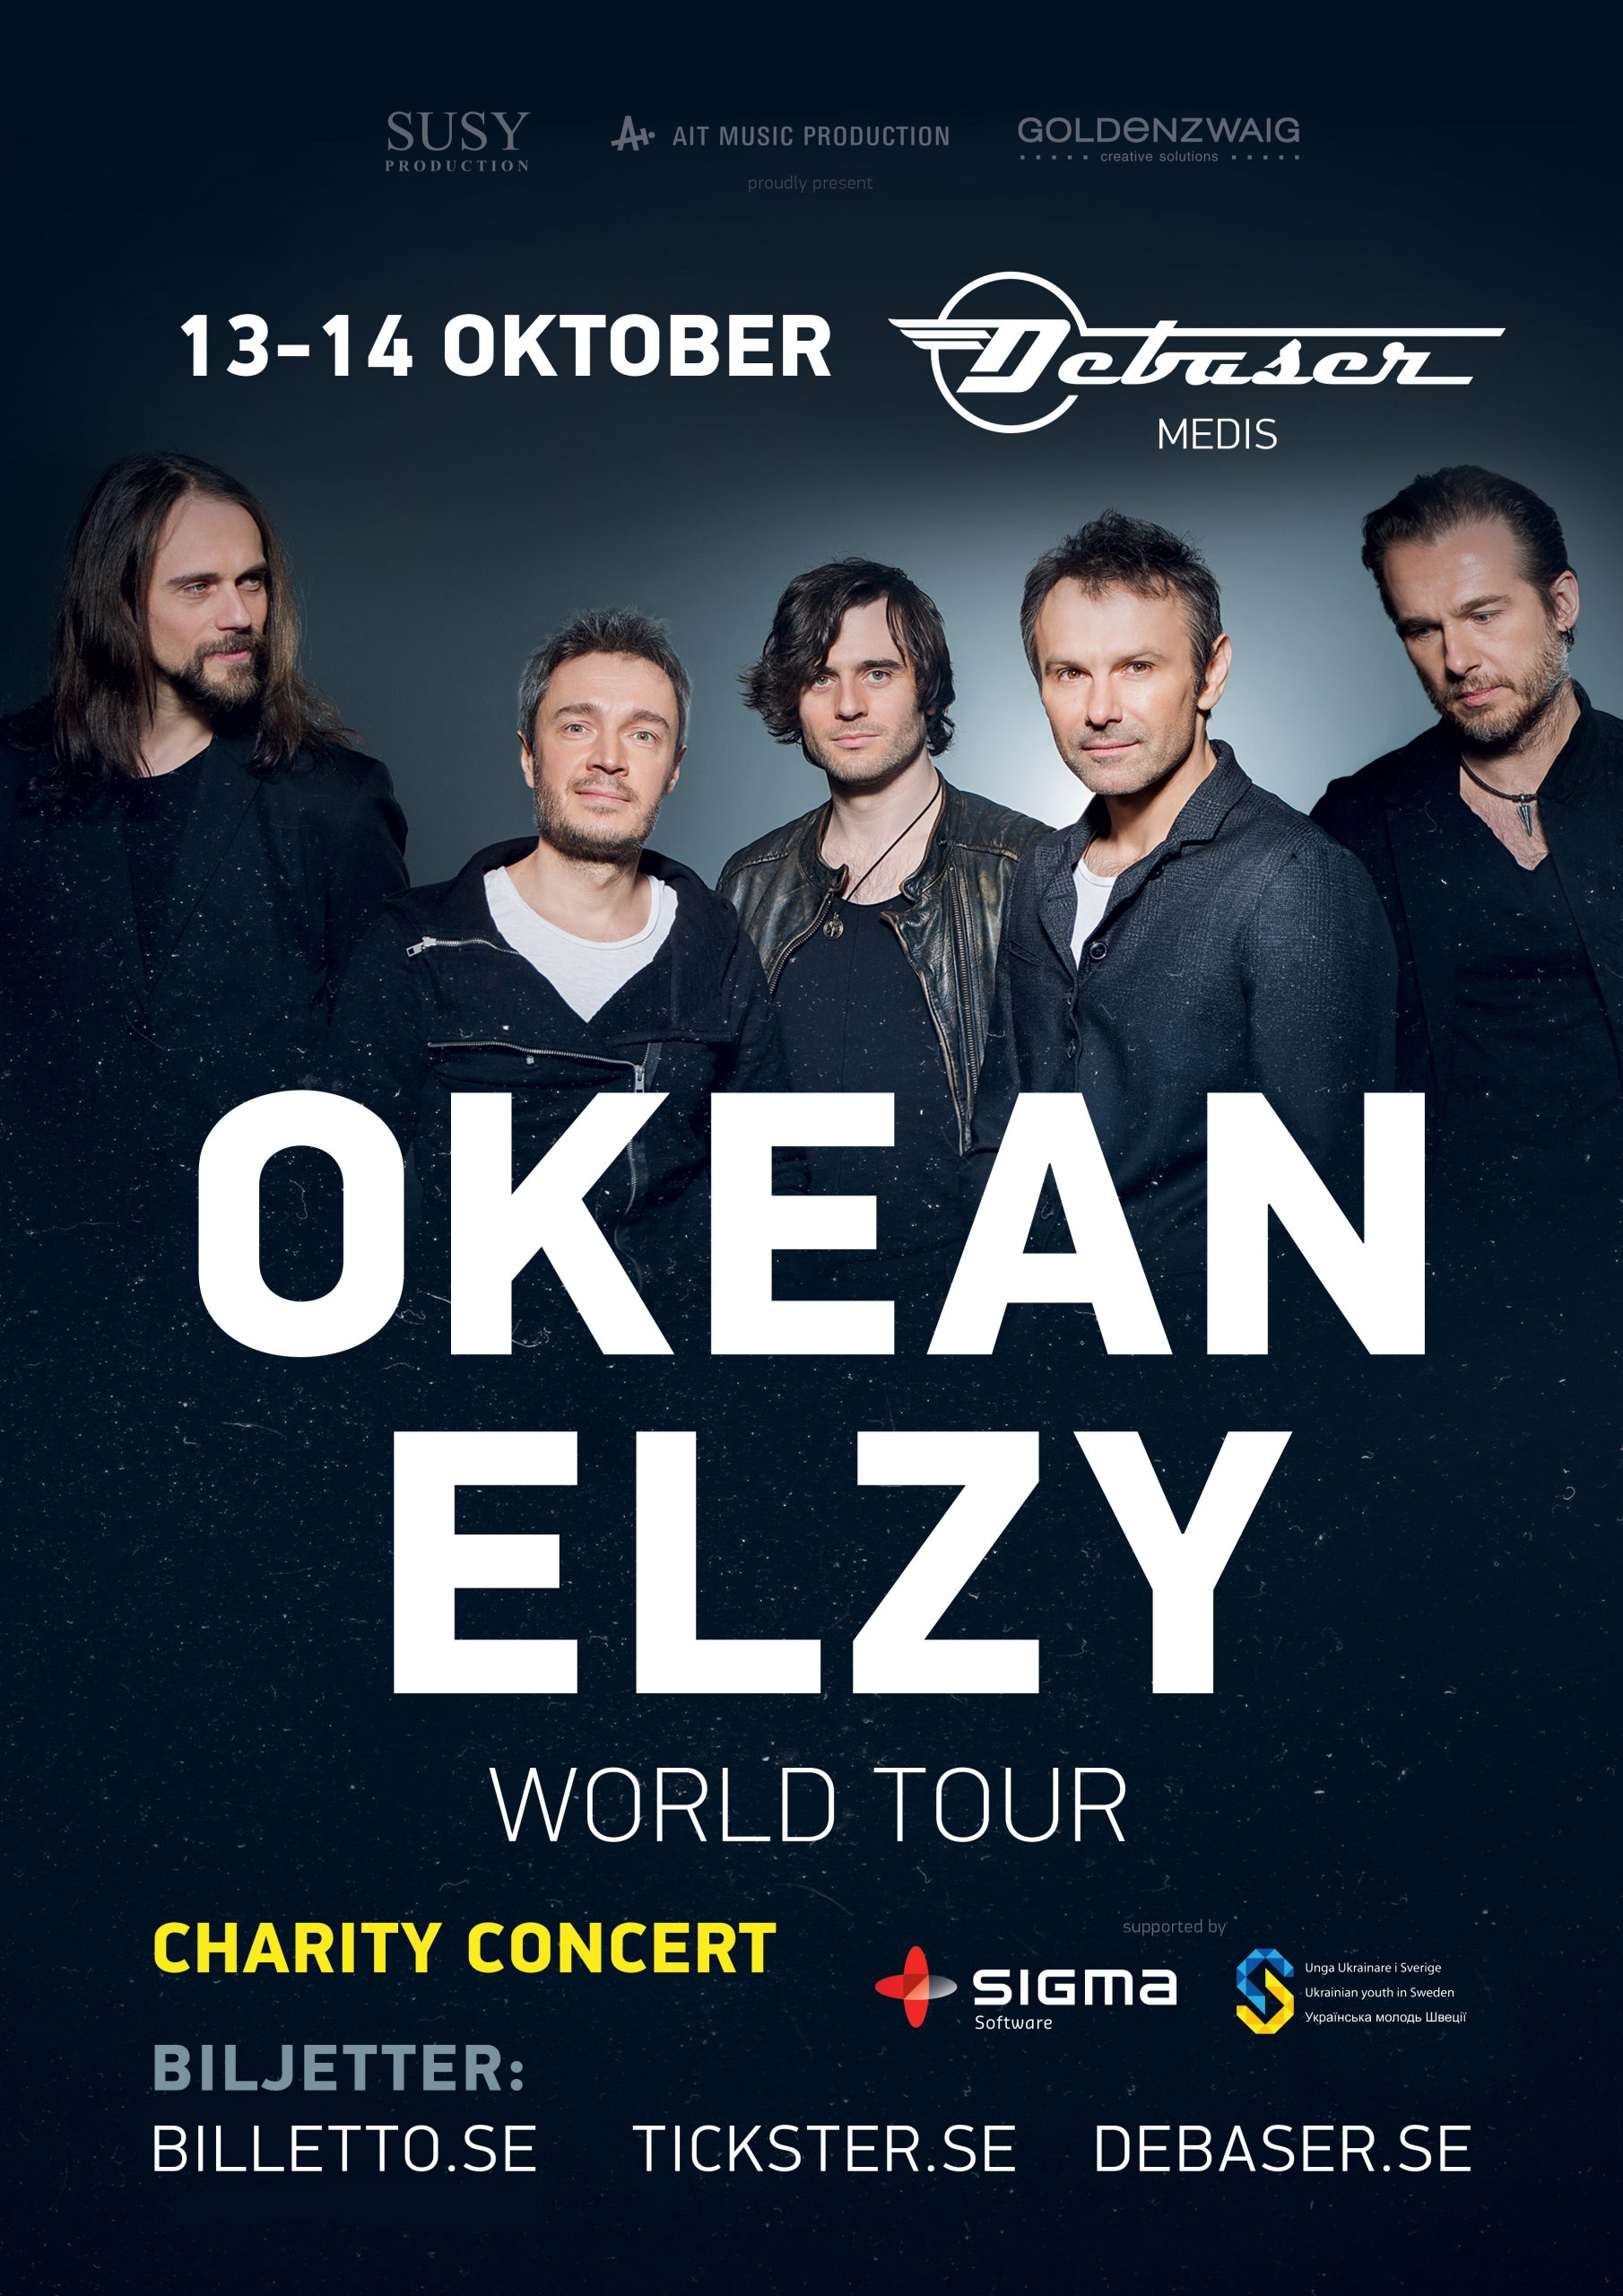 Sigma Software and Okean Elzy Run a Joint Charity Project